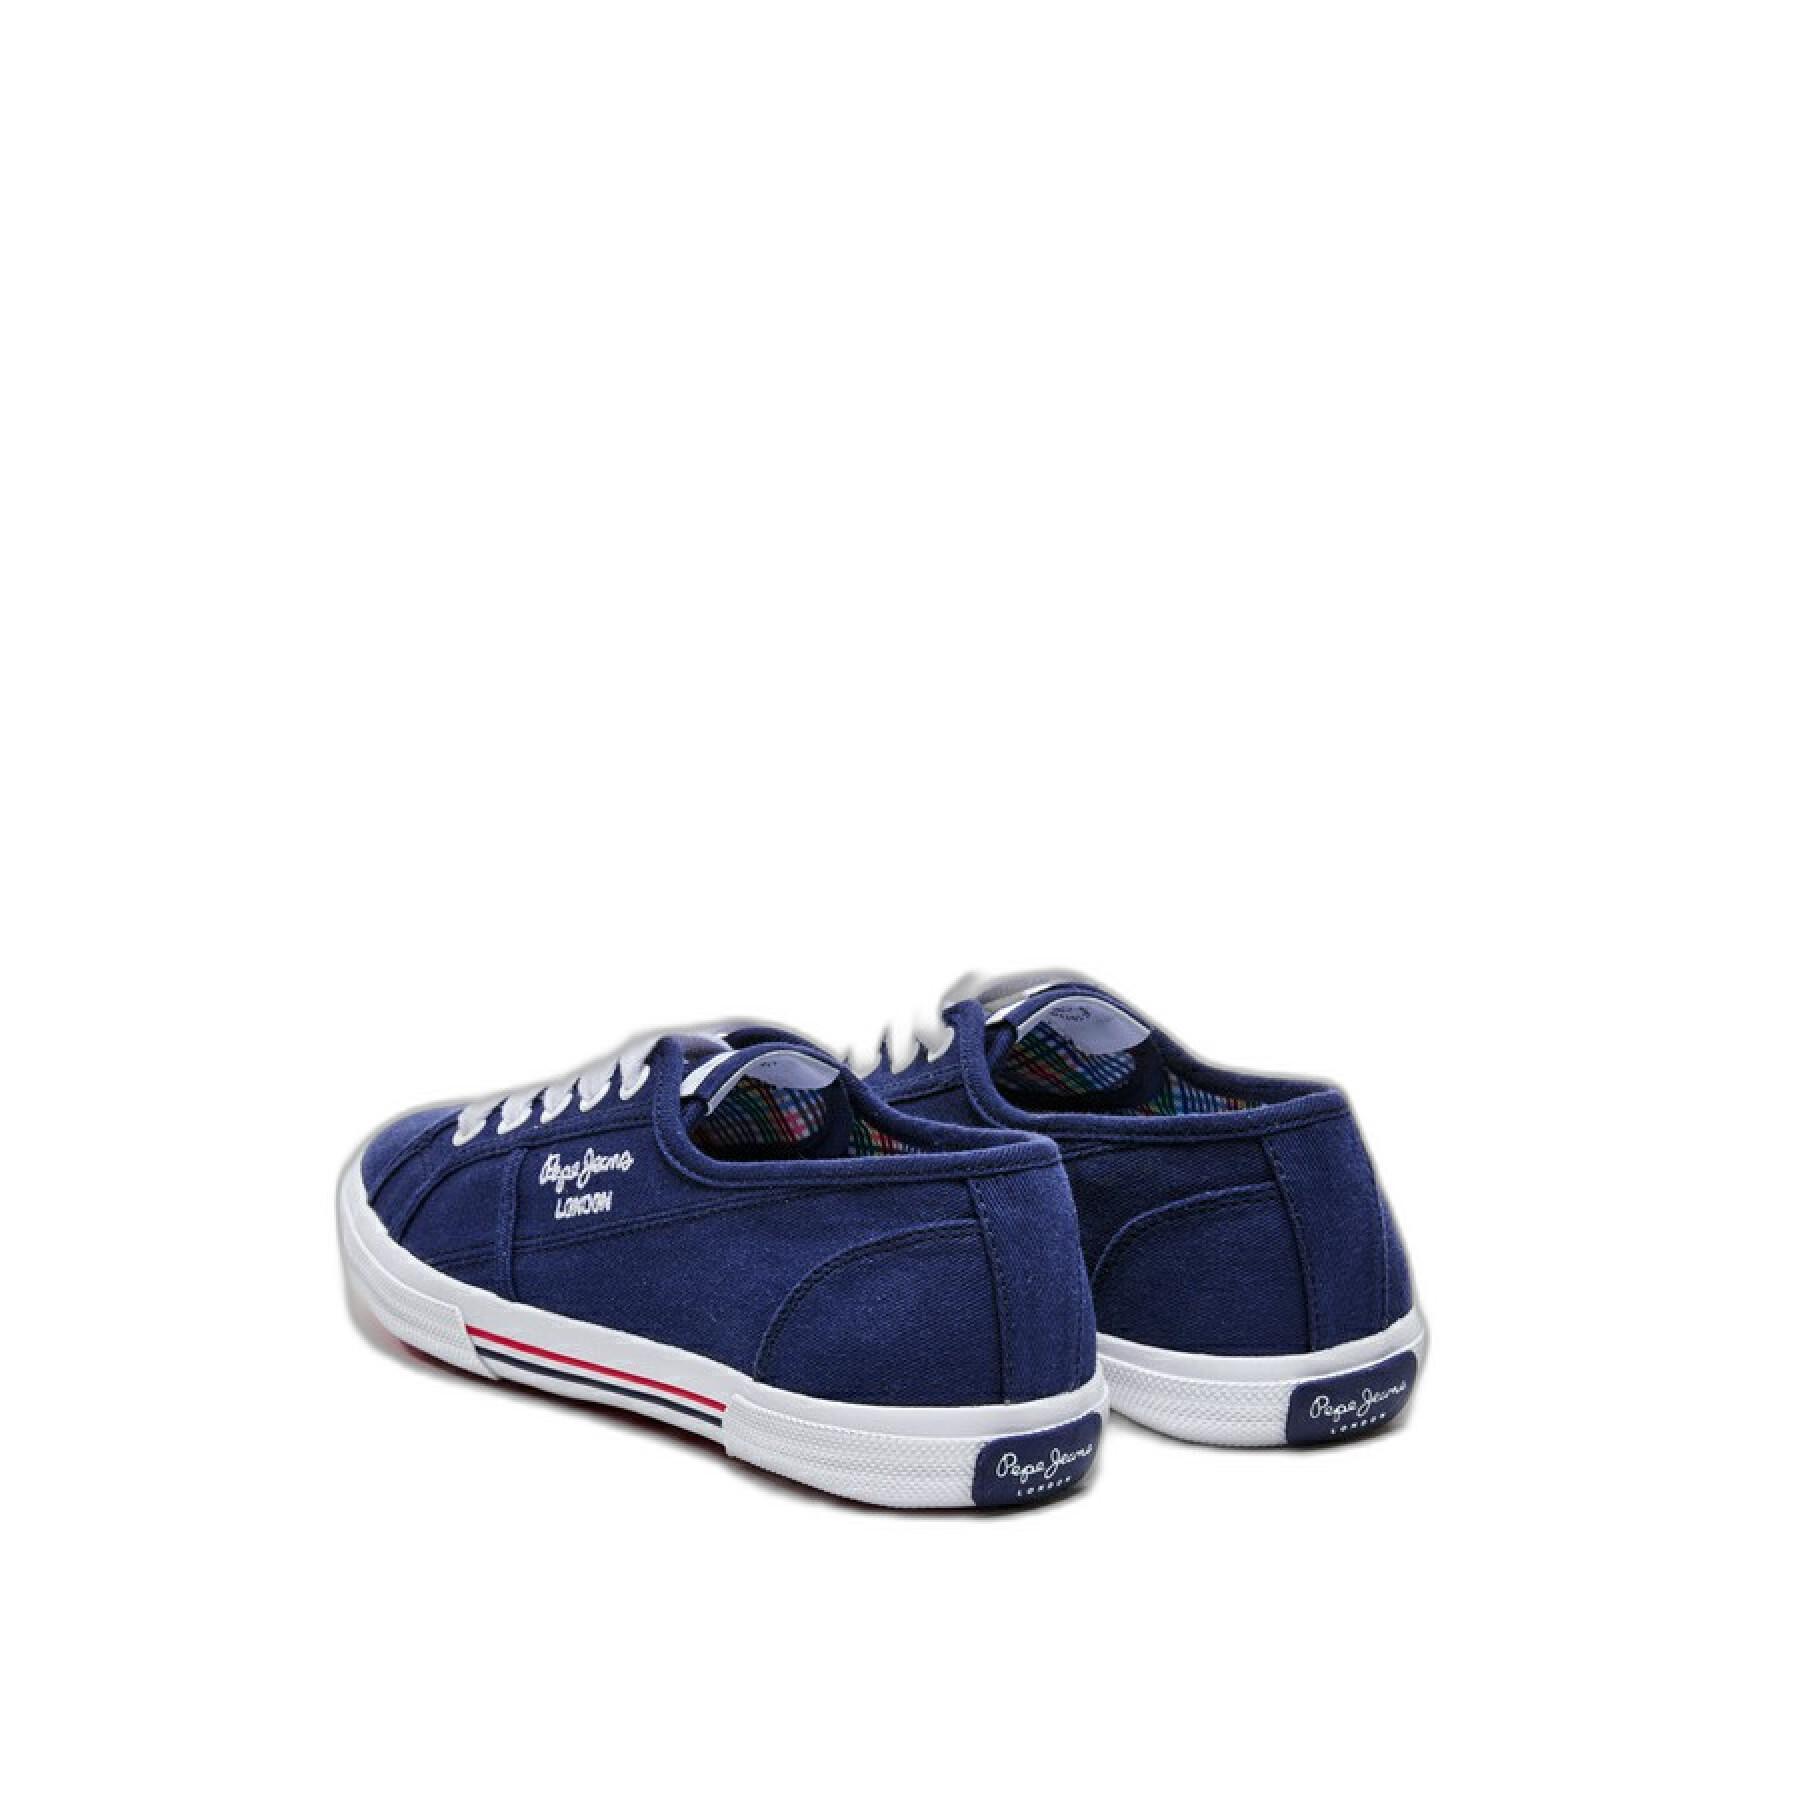 Damestrainers Pepe Jeans Aberlady Ecobass